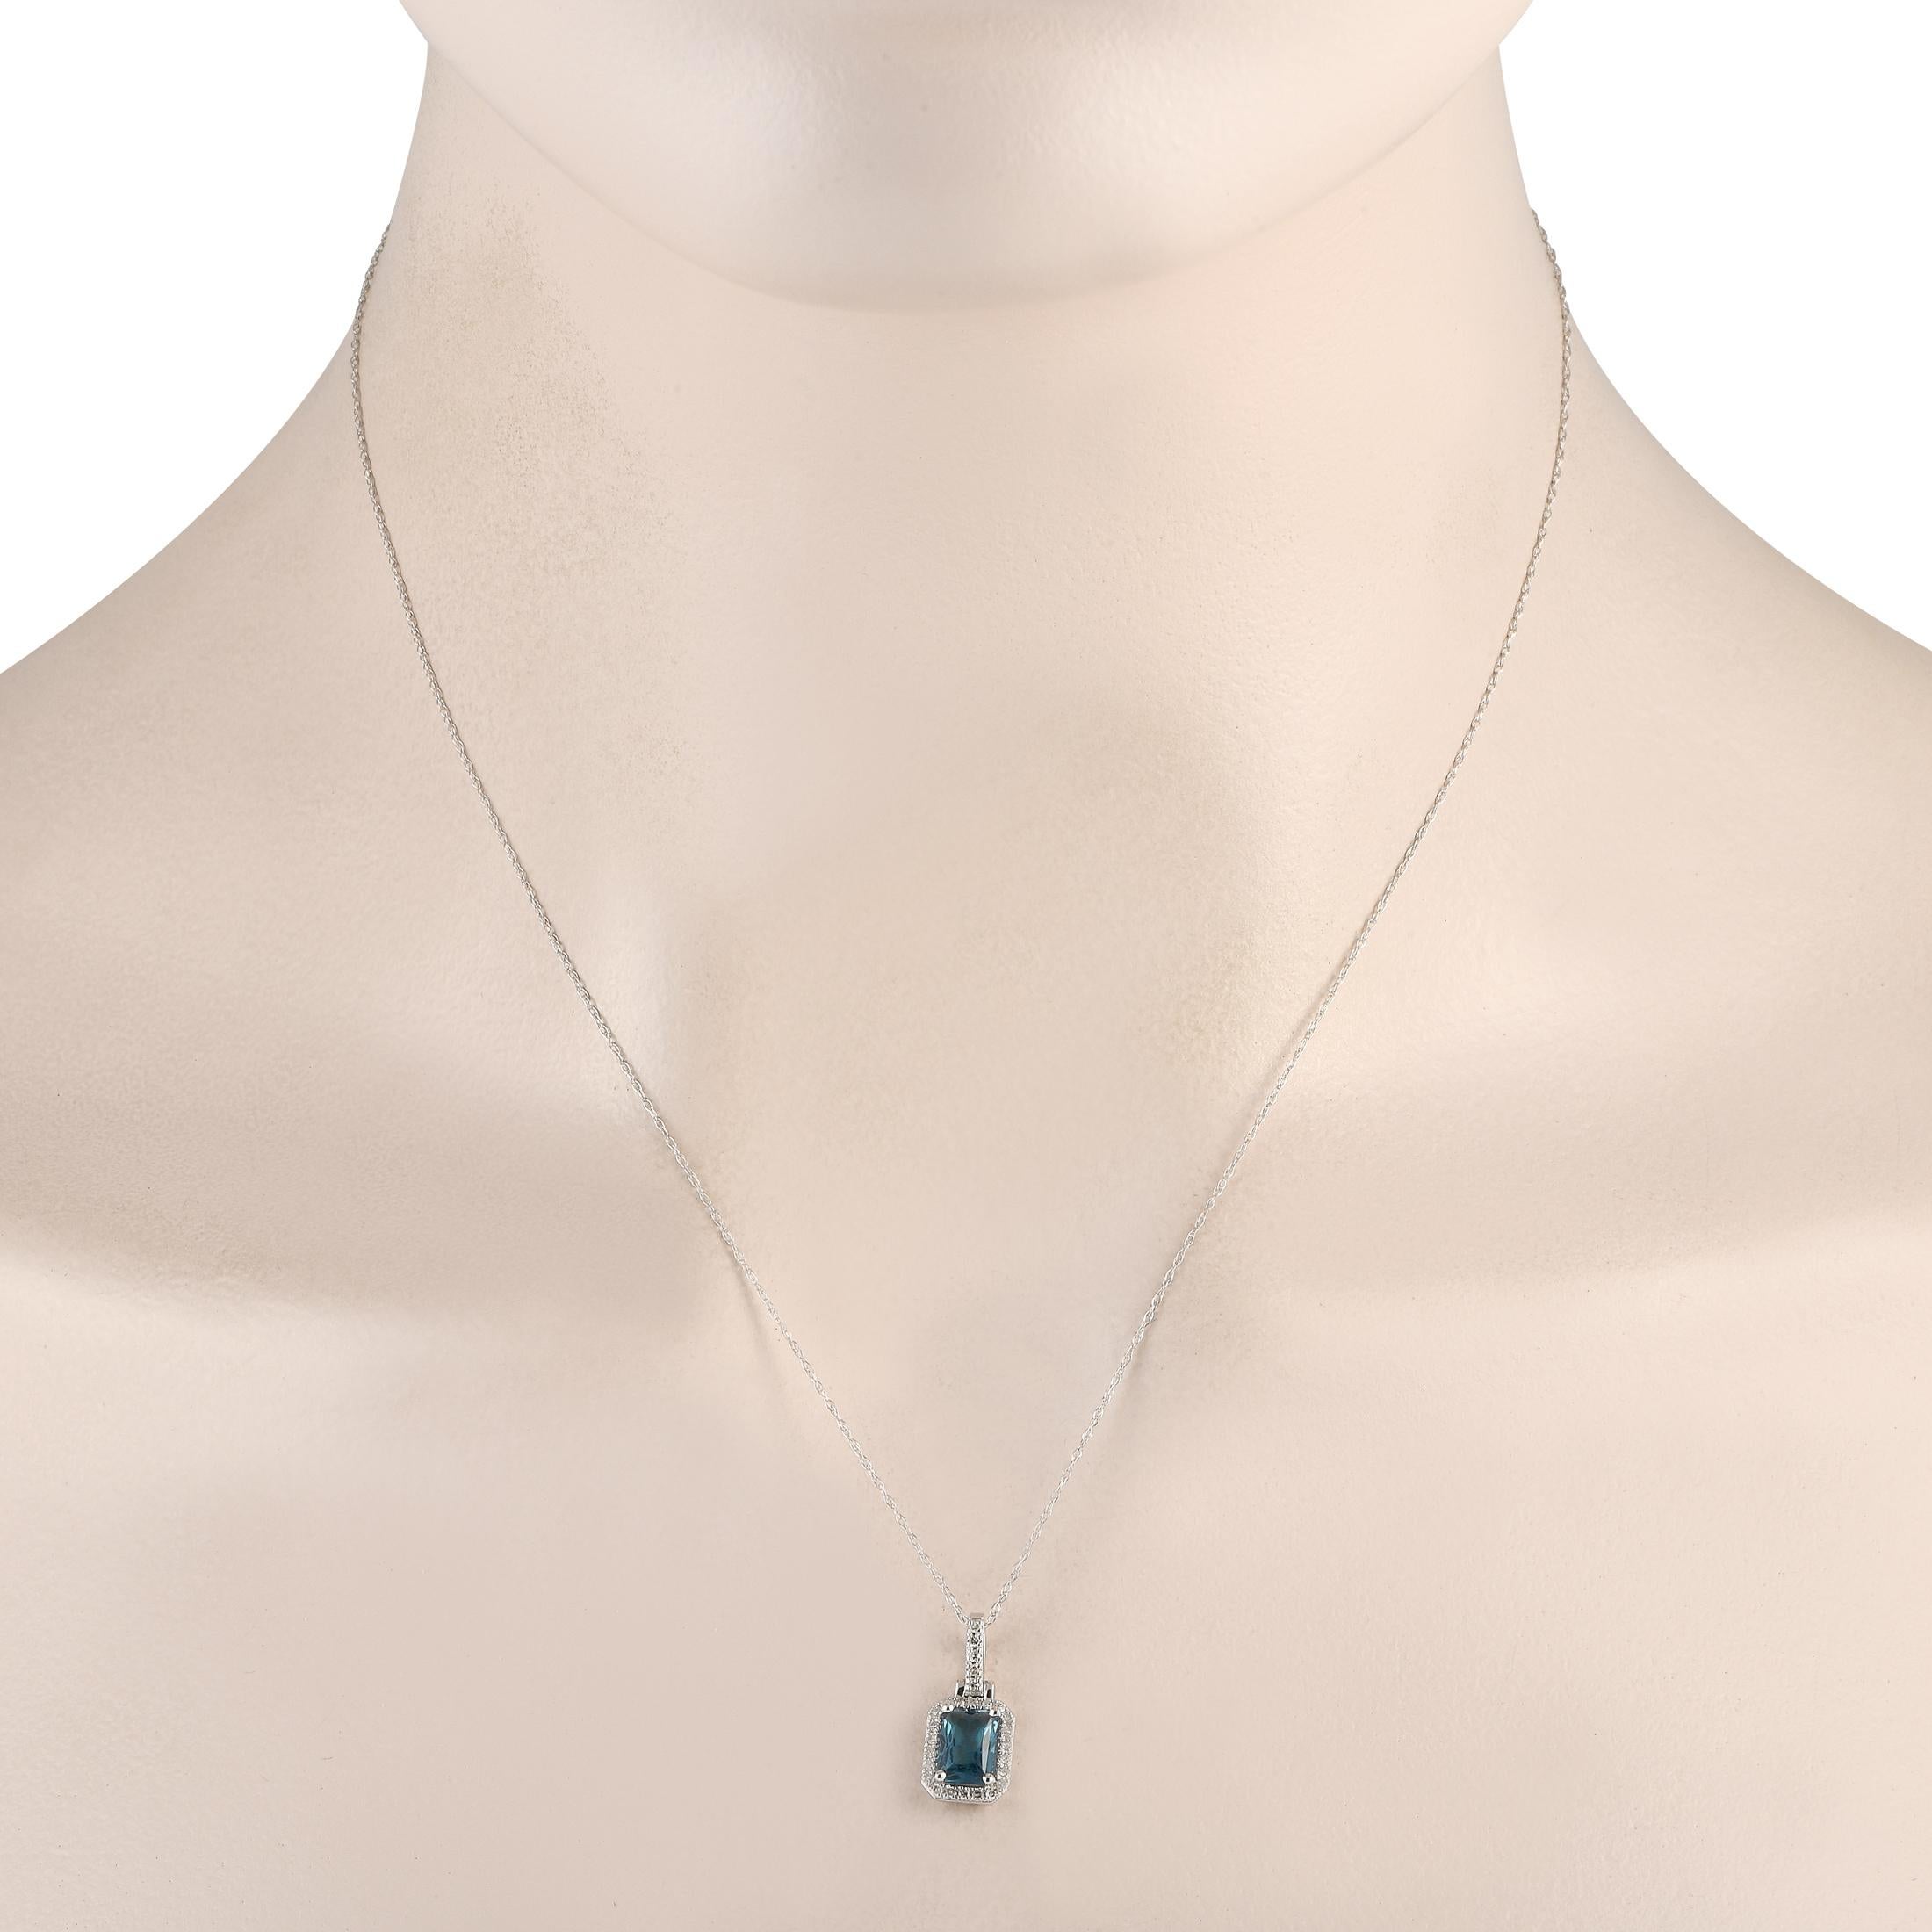 A captivating Blue Topaz gemstone is surrounded by a halo of diamonds totaling 0.12 carats on this impeccably crafted necklace. Suspended from an 18 chain, this pieces 14K White Gold pendant measures 0.65 long by 0.30 wide.This jewelry piece is